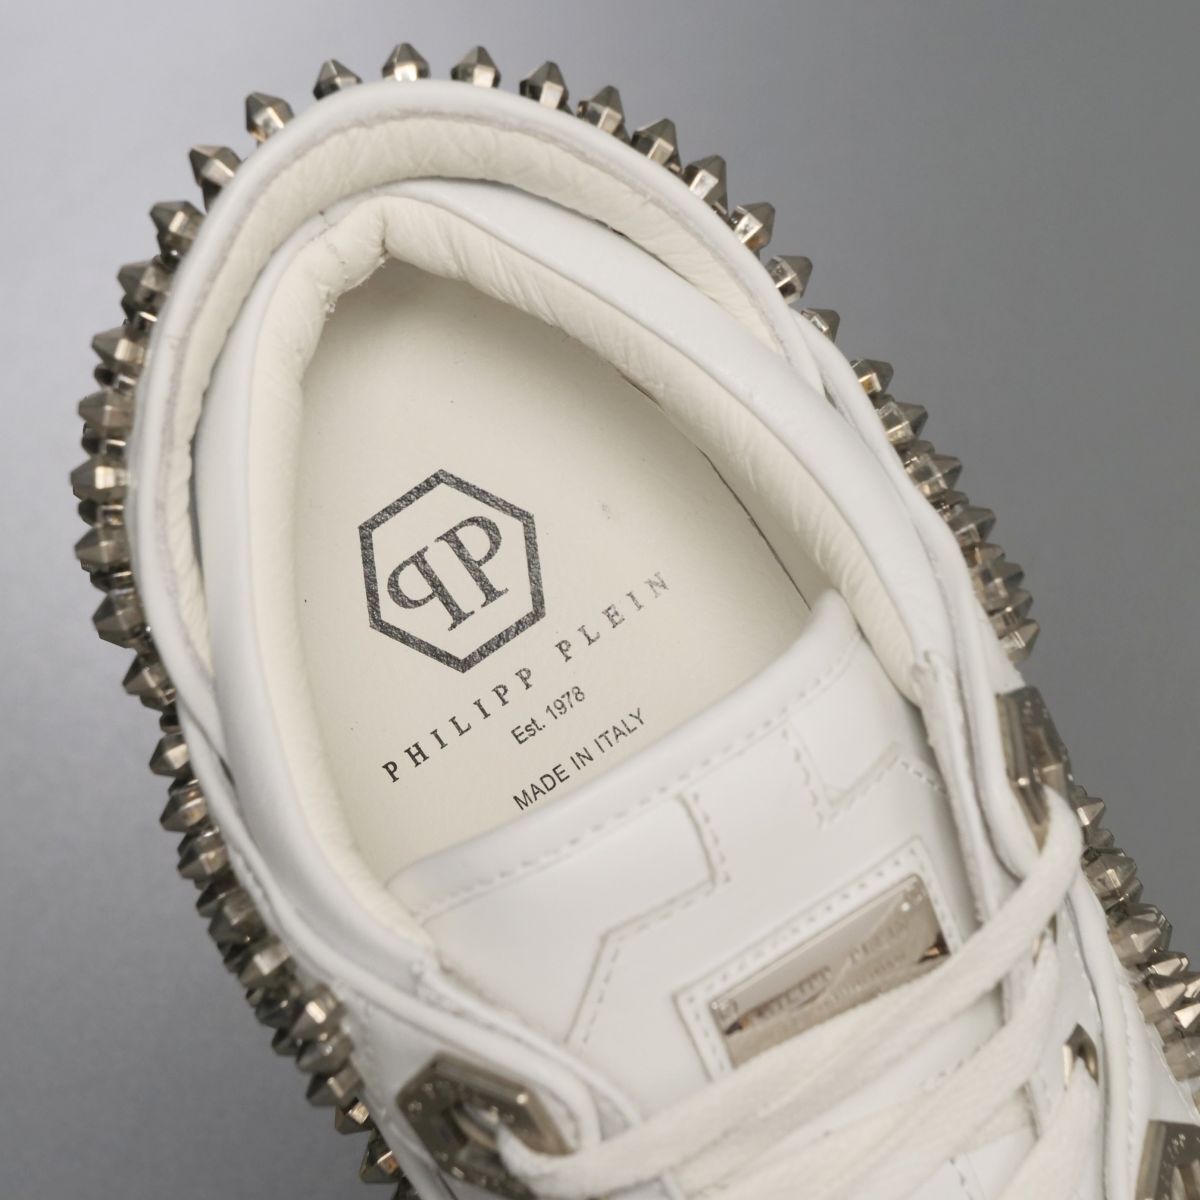 GP9499// Italy made * Philip plain /PHILIPP PLEIN* men's 43/ studs equipment ornament / leather sneakers / low cut / shoes / white / white 